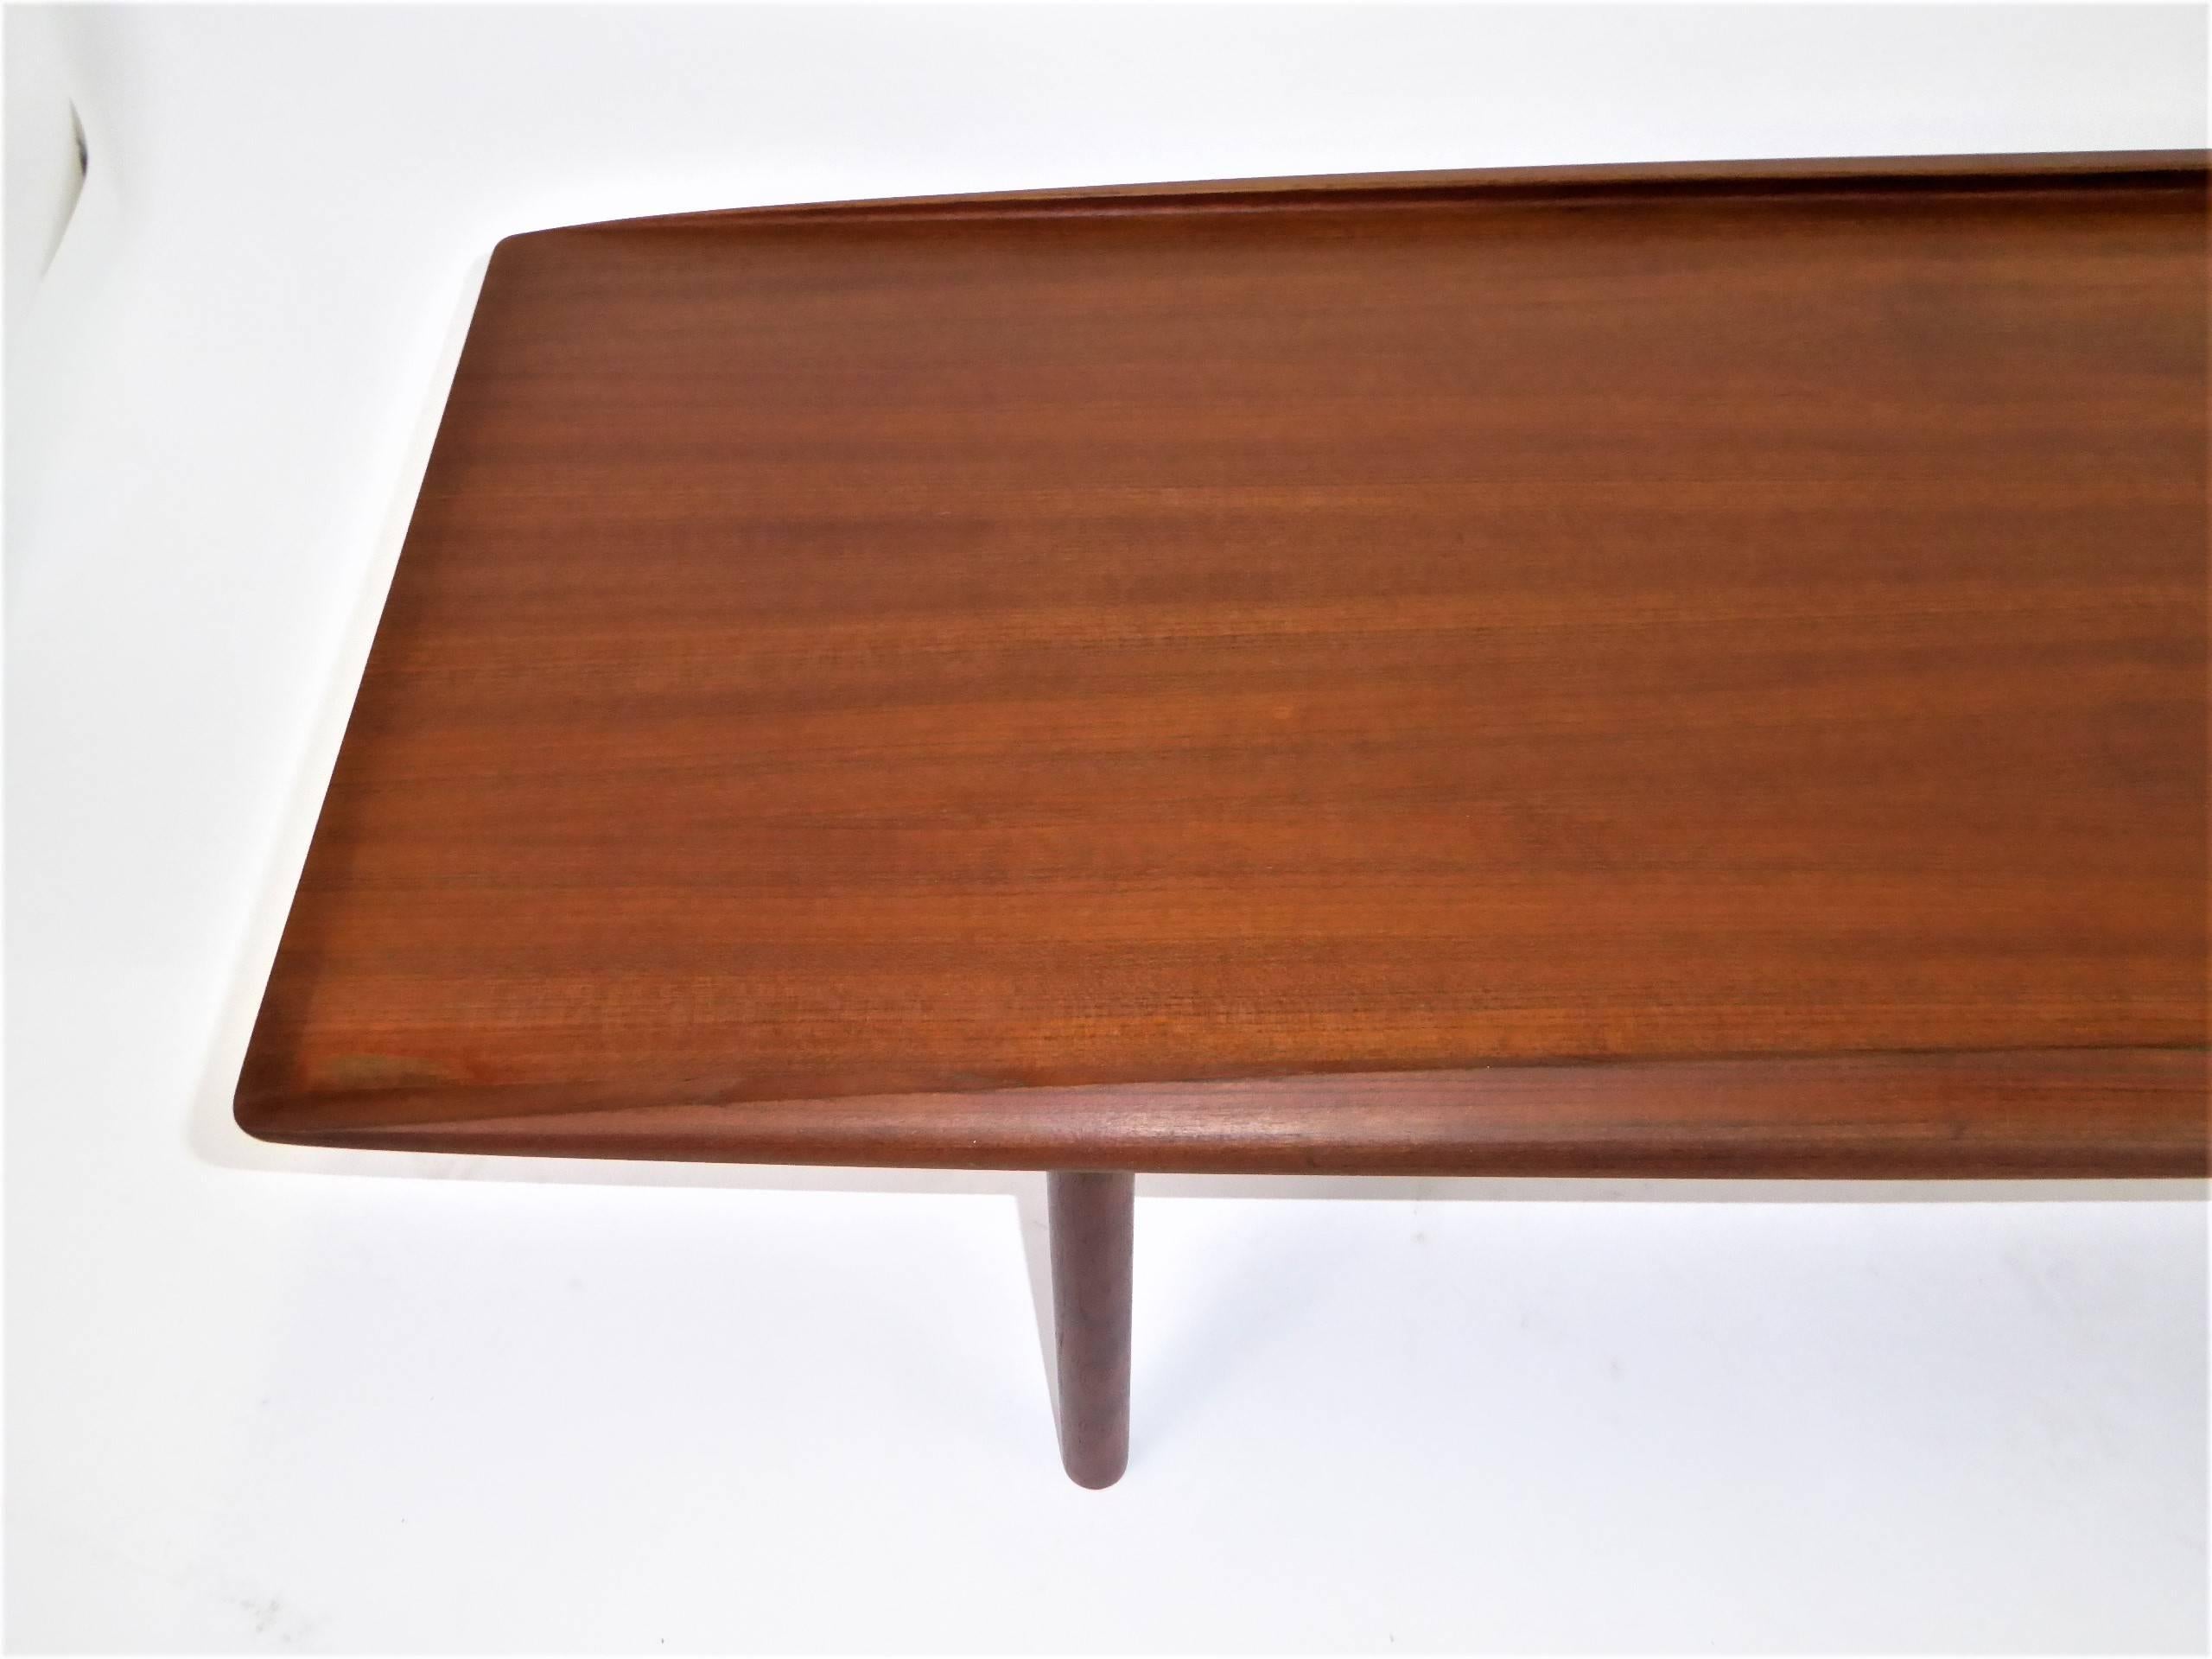 1960s Grete Jalk Surfboard Coffee Table for Poul Jeppesen 2